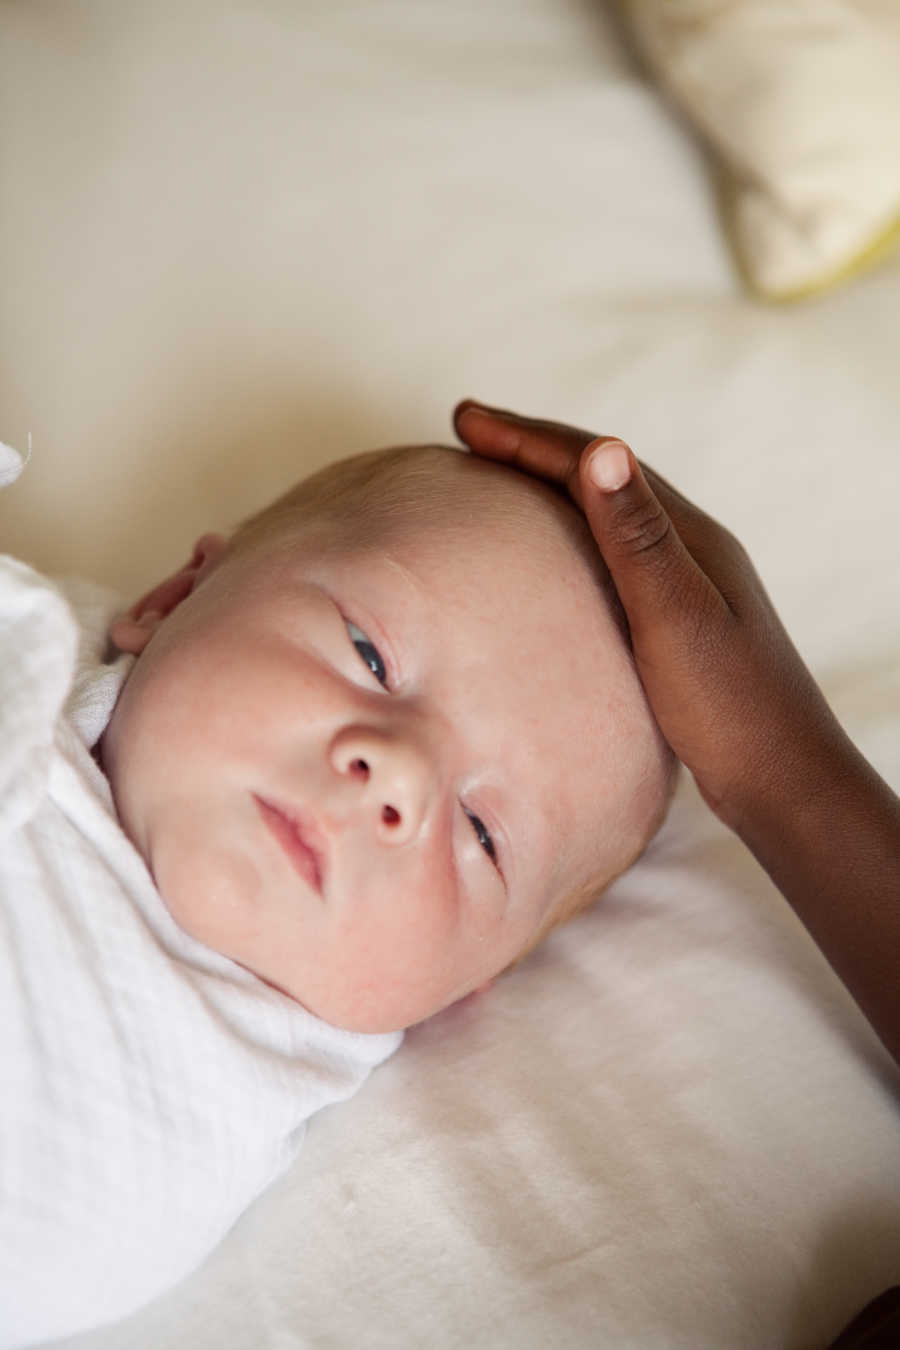 White baby lays swaddled in white blanket while African American child's hand rests on his head